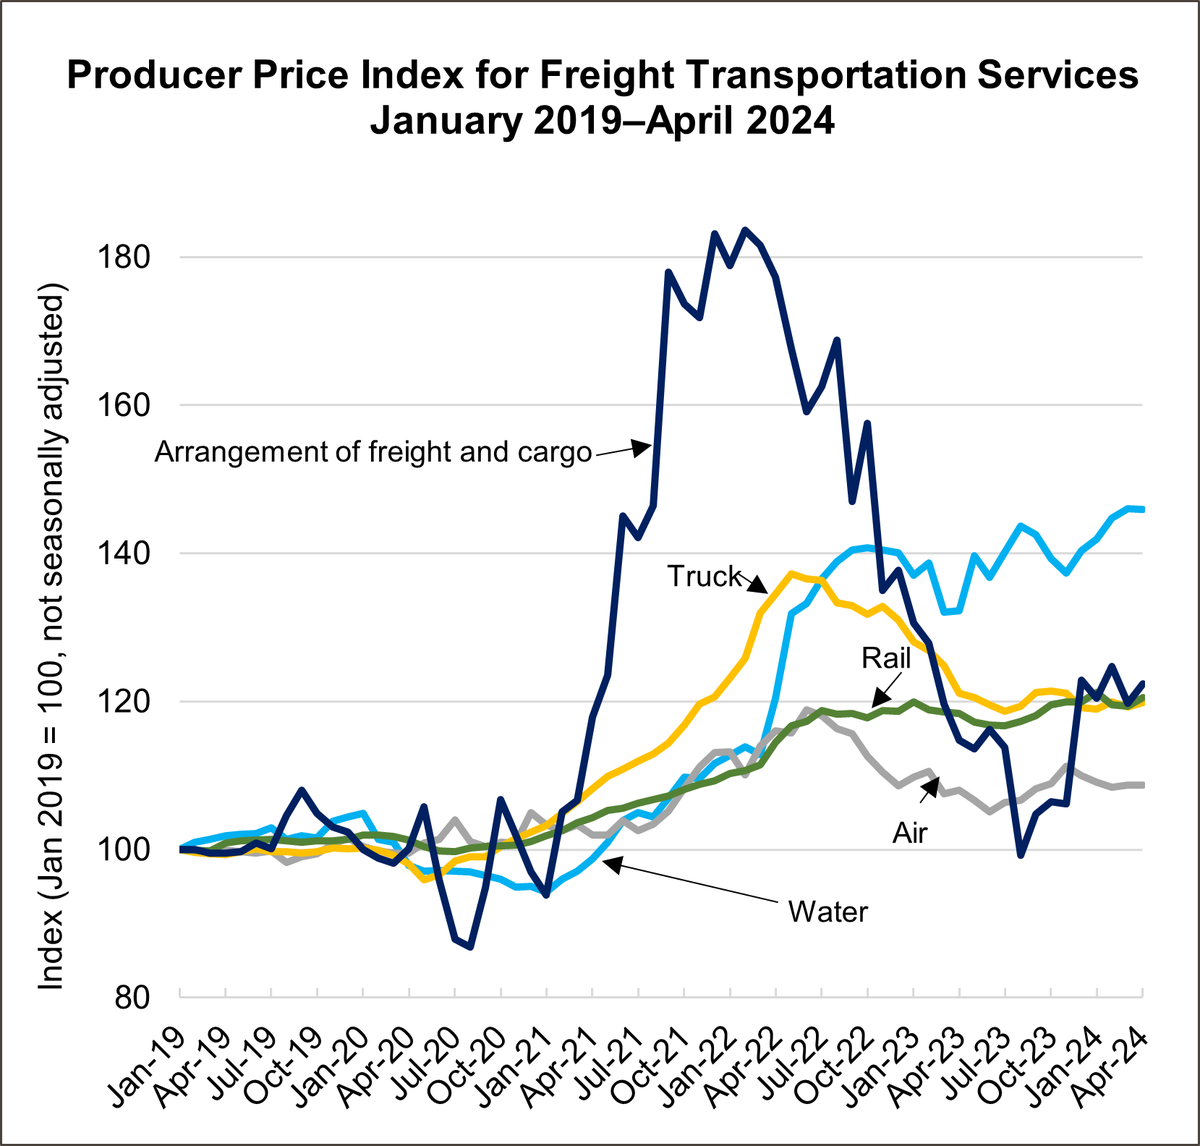 #Prices for #Transportation of freight equipment rose 1.7%, measured by per the Producer Price Index #PPI from April 2023-April 2024. ✈️#Air⬆️0.6% 🚂#Rail⬆️1.8% 🚚#Truck⬇️1.0% 🛳️#Water⬆️10.4% Arrangement of #Freight & #Cargo⬆️6.7% data.bts.gov/stories/s/f9jm… data.bts.gov/stories/s/jrb8…